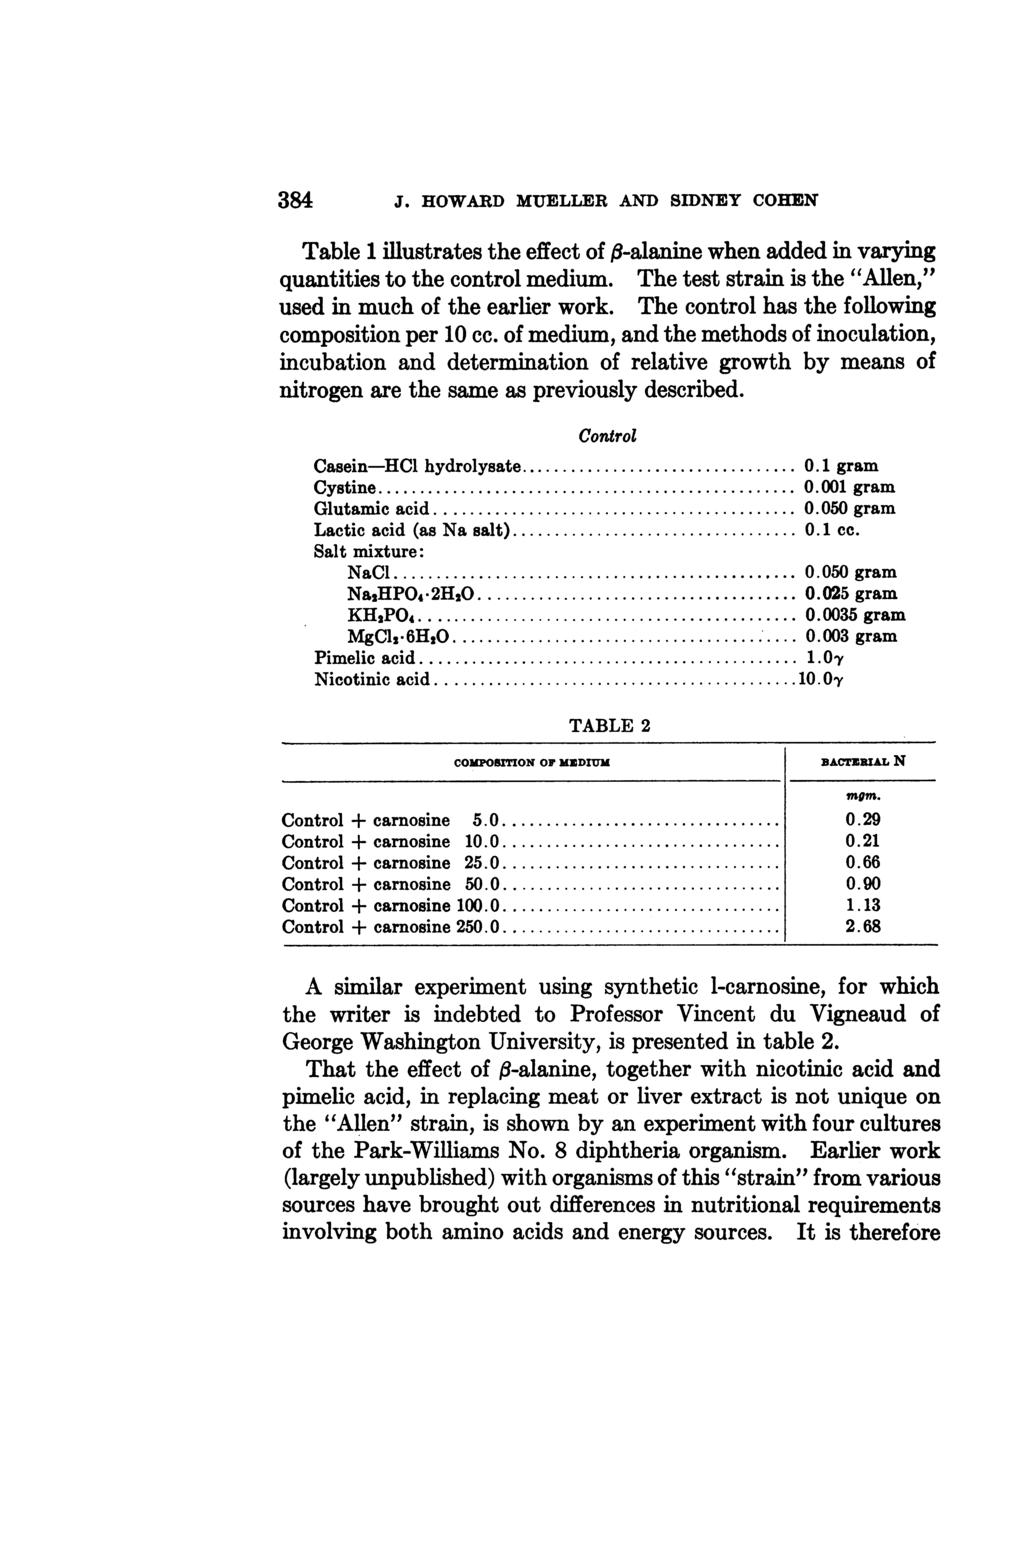 384 J. HOWARD MUELLER AND SIDNEY COHEN Table 1 illustrates the effect of jb-alanine when added in varying quantities to the control medium.